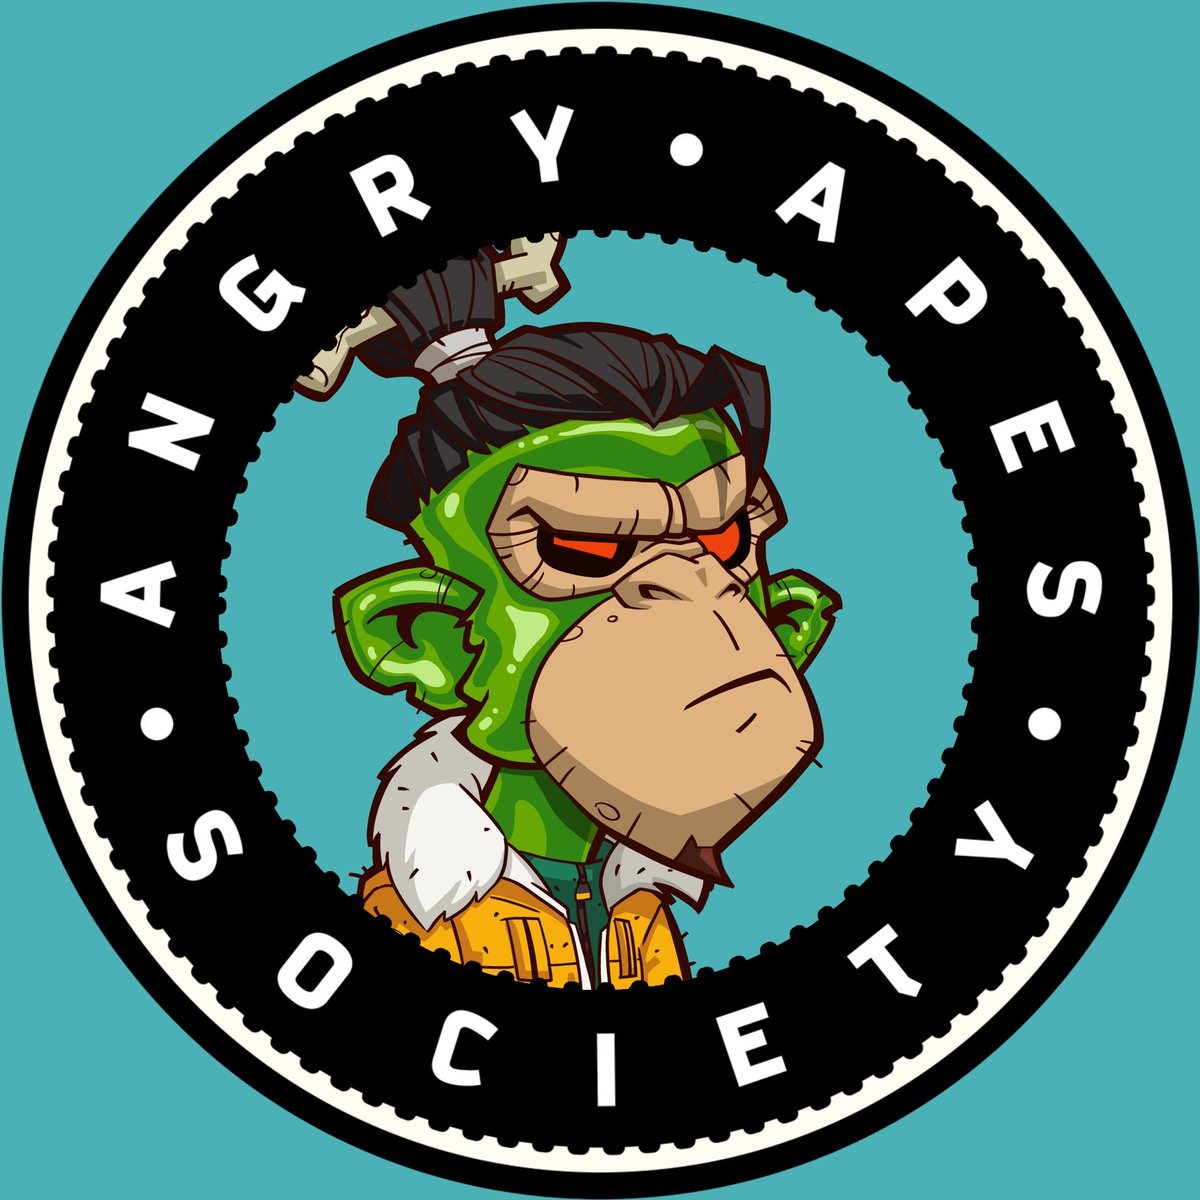 Angry Apes Society, a digital art delight,
NFT expressions, a pixelated fight.
Through blockchain realms, they roar and play,
An artist’s vision, forever on display.
@AngryApesNFT 💚 #AAS #AngryApes #AngryRiders #AngryApesNFT #AngryApesSociety #AngryButHappy #StayAngry 🦧🍌